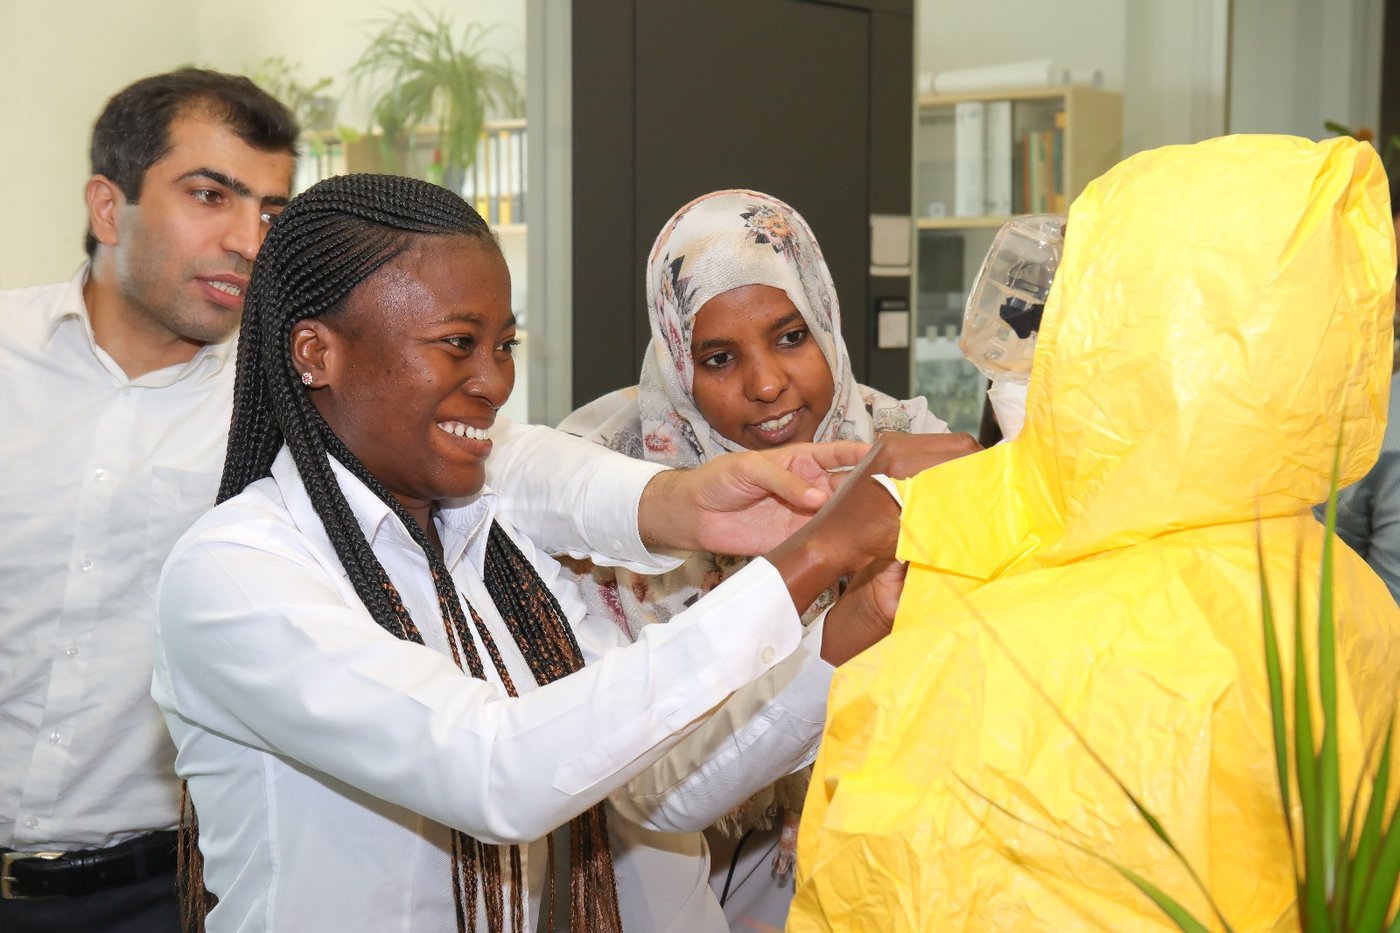 The photo shows three diverse people helping a fourth to put on a personal protective suit.